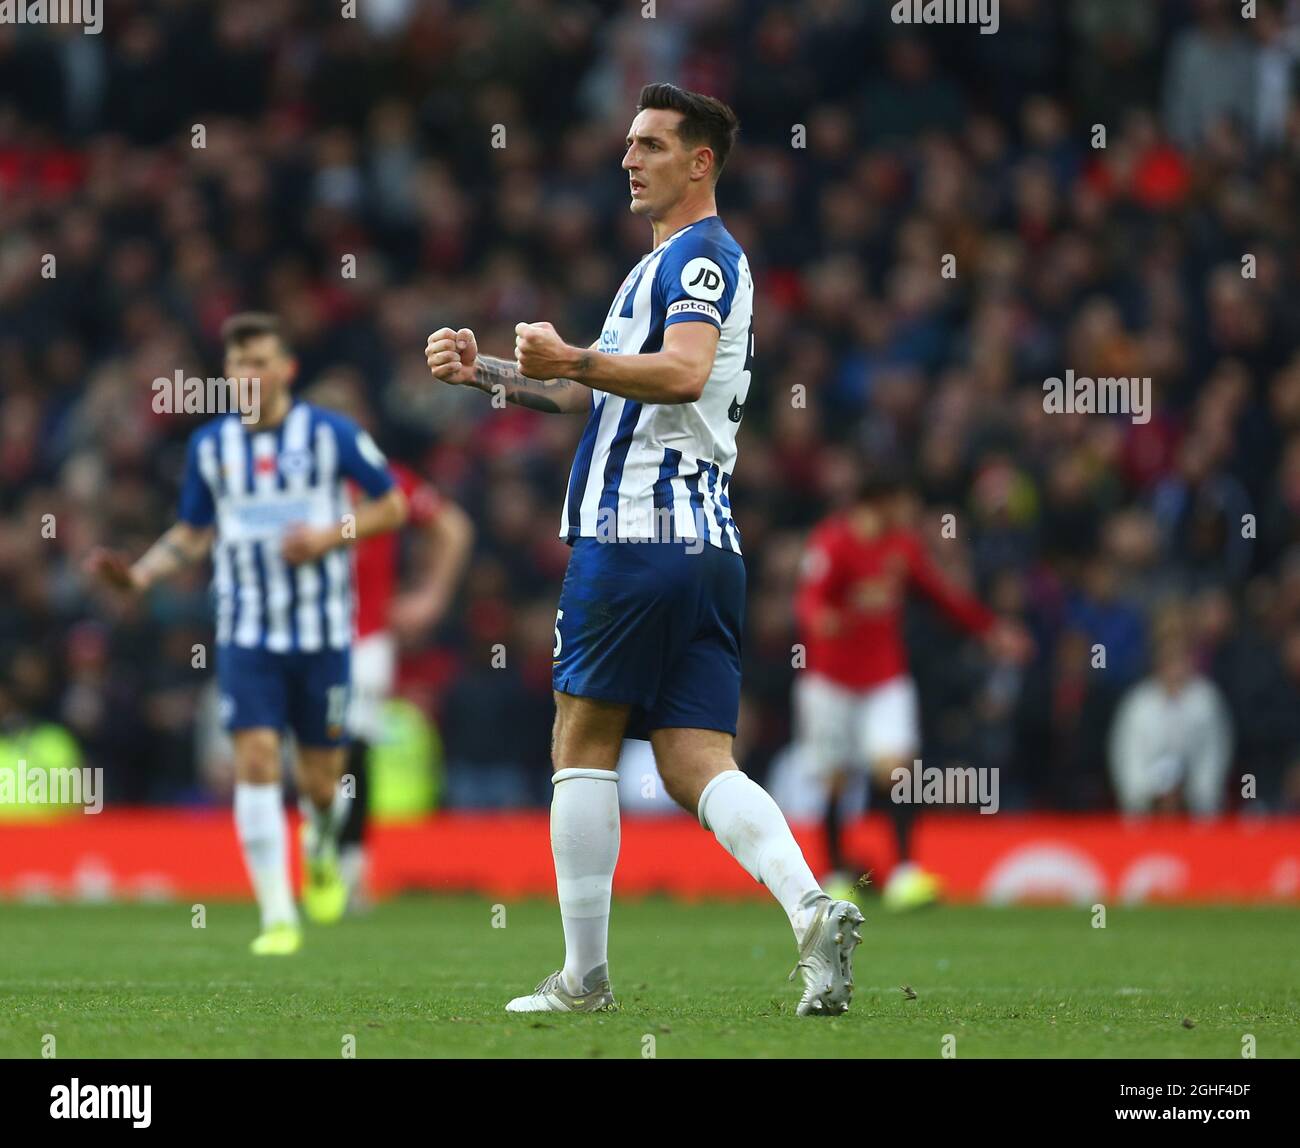 Lewis Dunk of Brighton celebrates his goal during the Premier League match at Old Trafford, Manchester. Picture date: 10th November 2019. Picture credit should read: Phil Oldham/Sportimage via PA Images Stock Photo